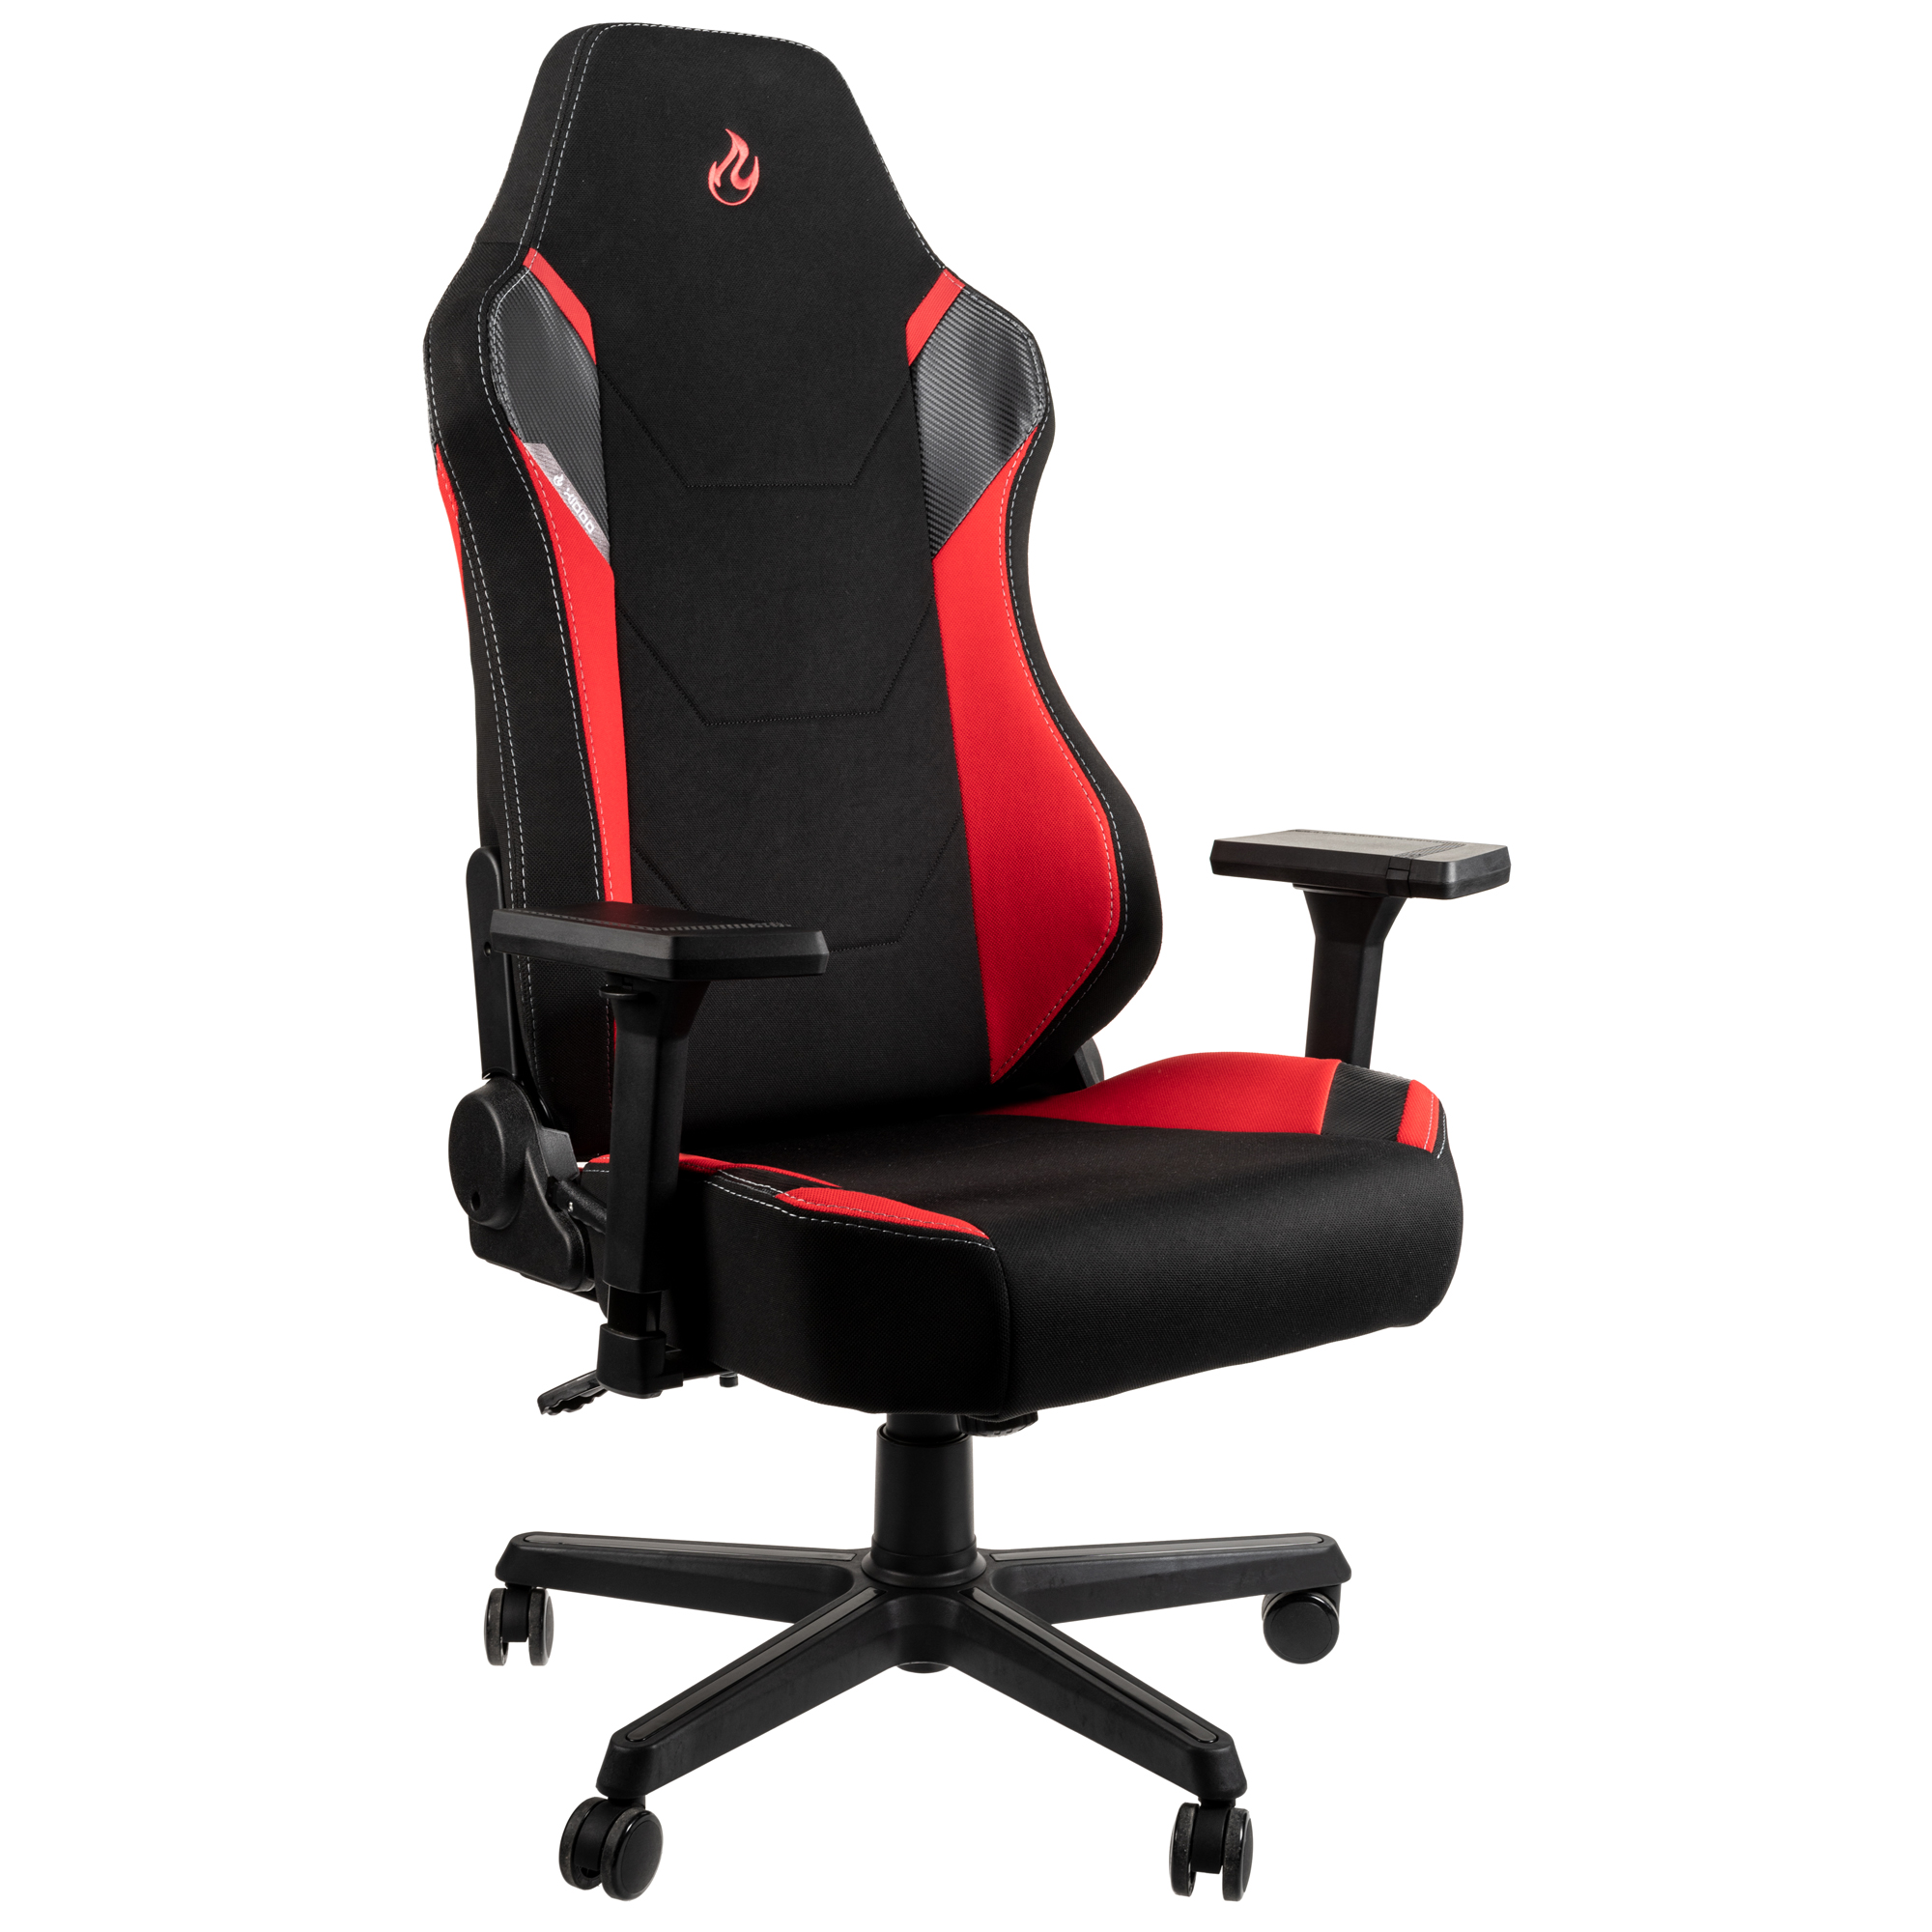 X1000 Gaming Chairs